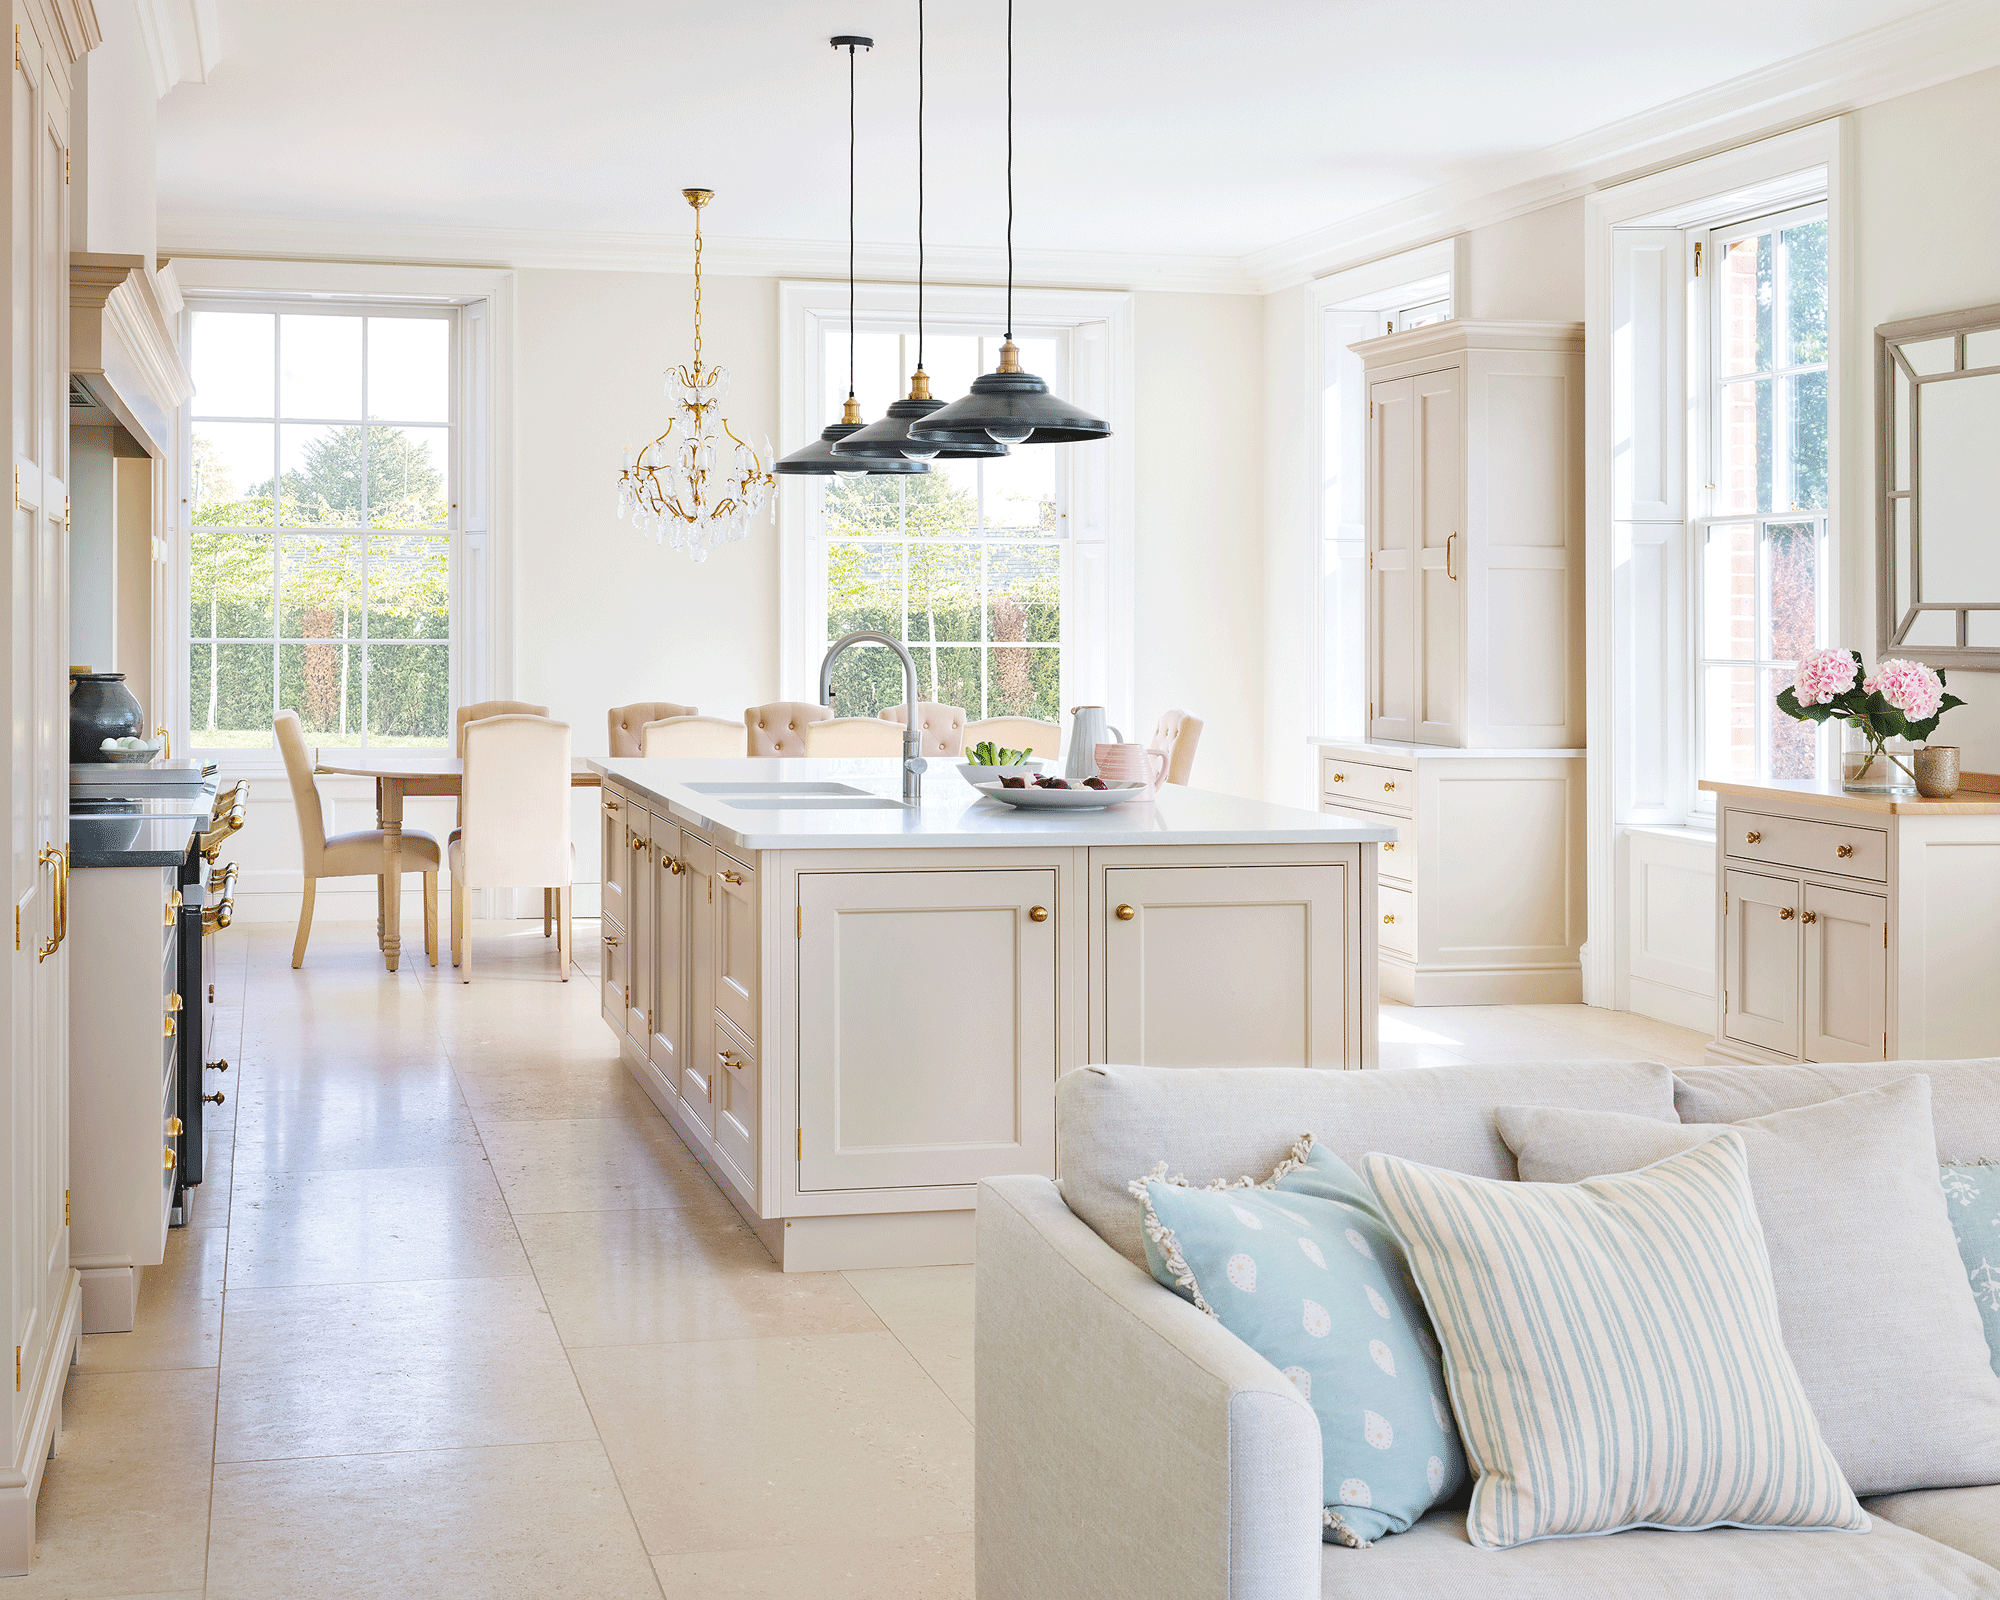 A country style painted kitchen with cream cabinetry